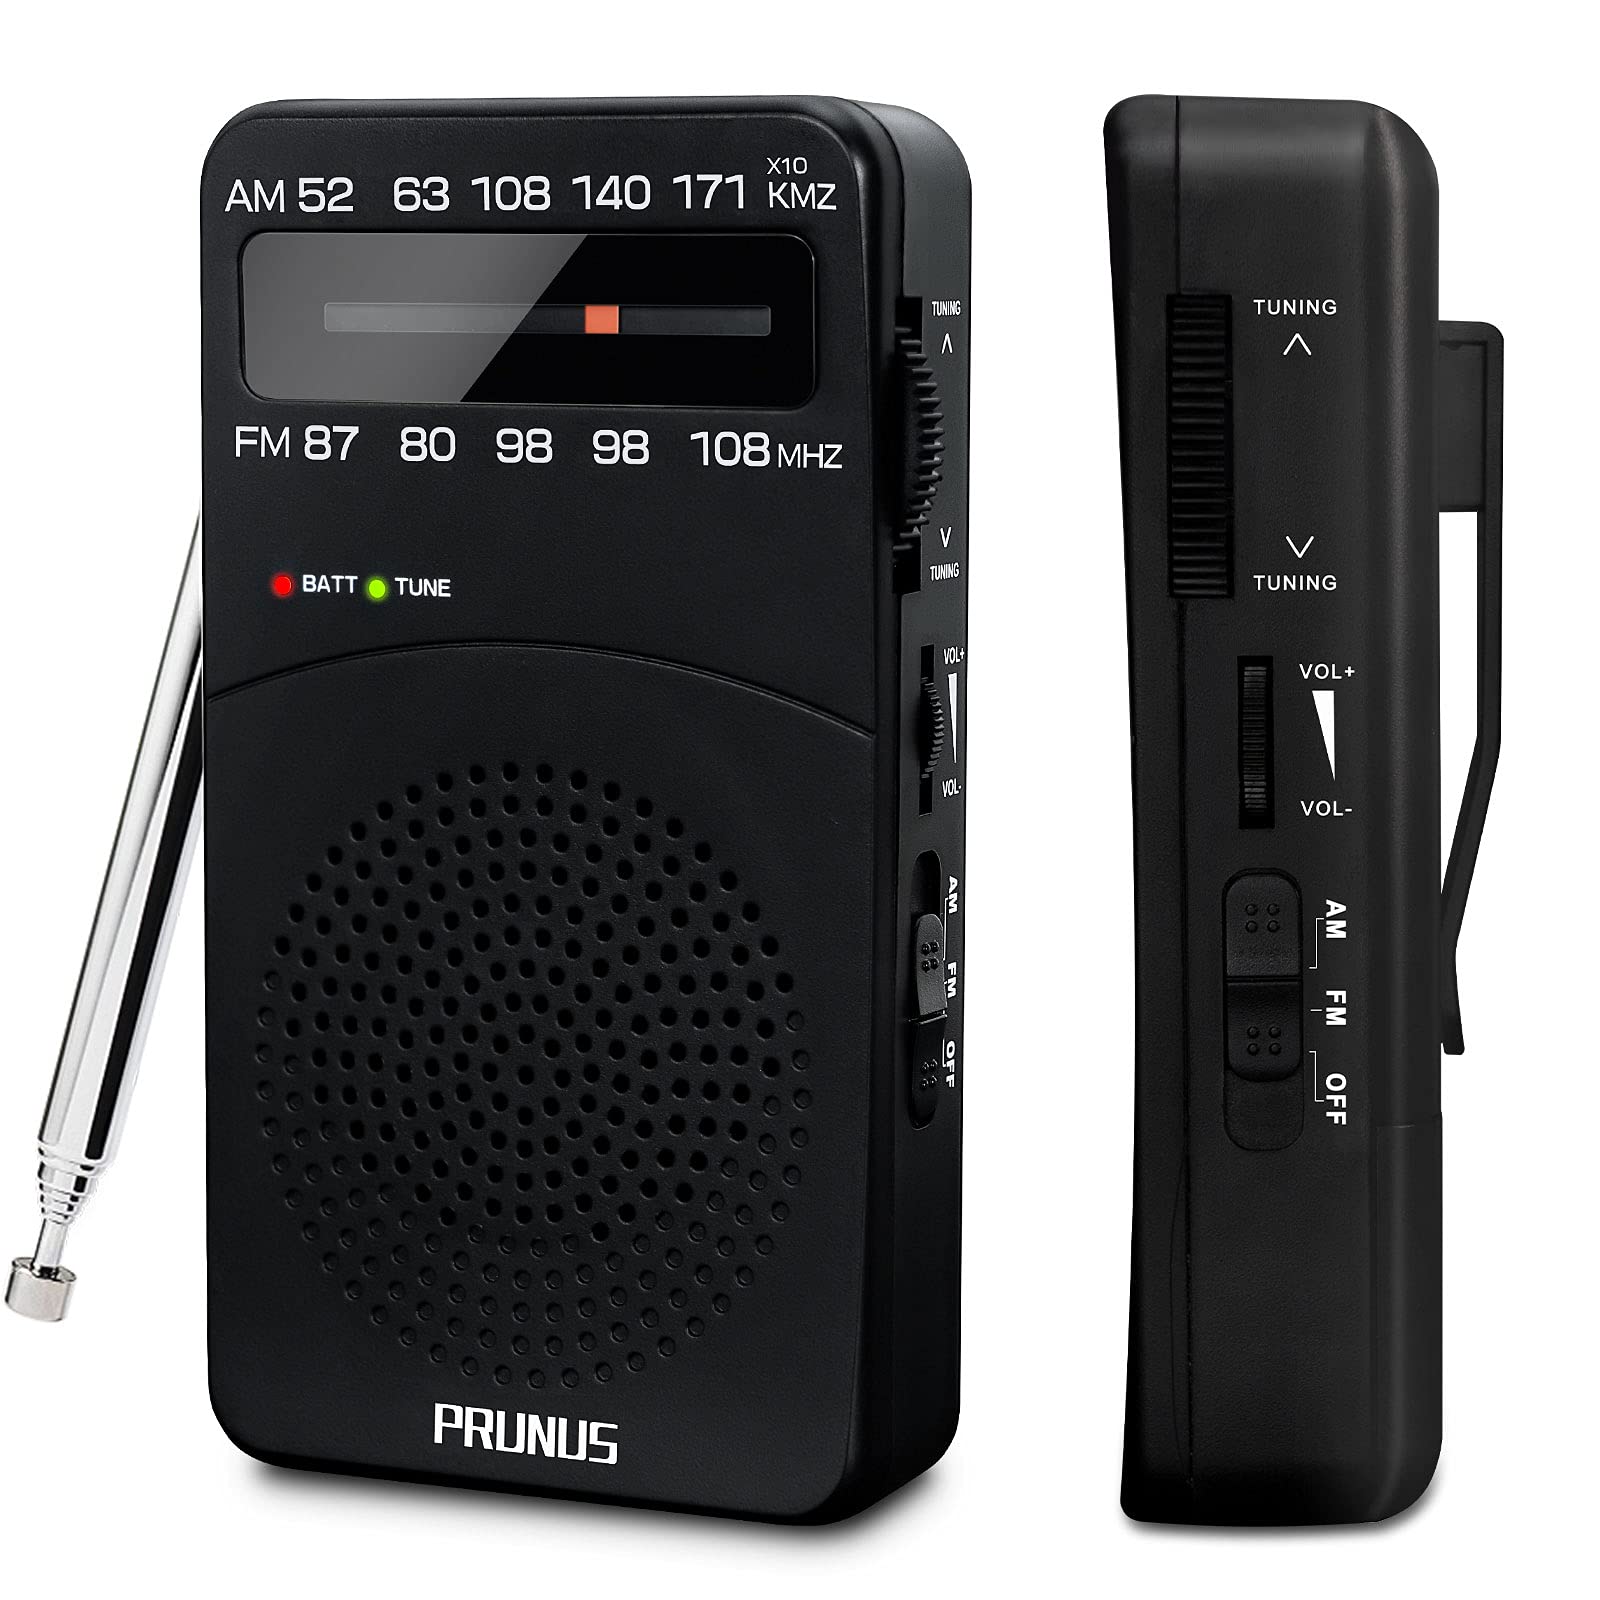 J-166 Pocket Radio Transistor, AM FM Small Radio Portable, Battery Operated Radio with Tuning Light, Back Clip, Excellent Reception for Outdoor & Indoor & Emergencies by PRUNUS